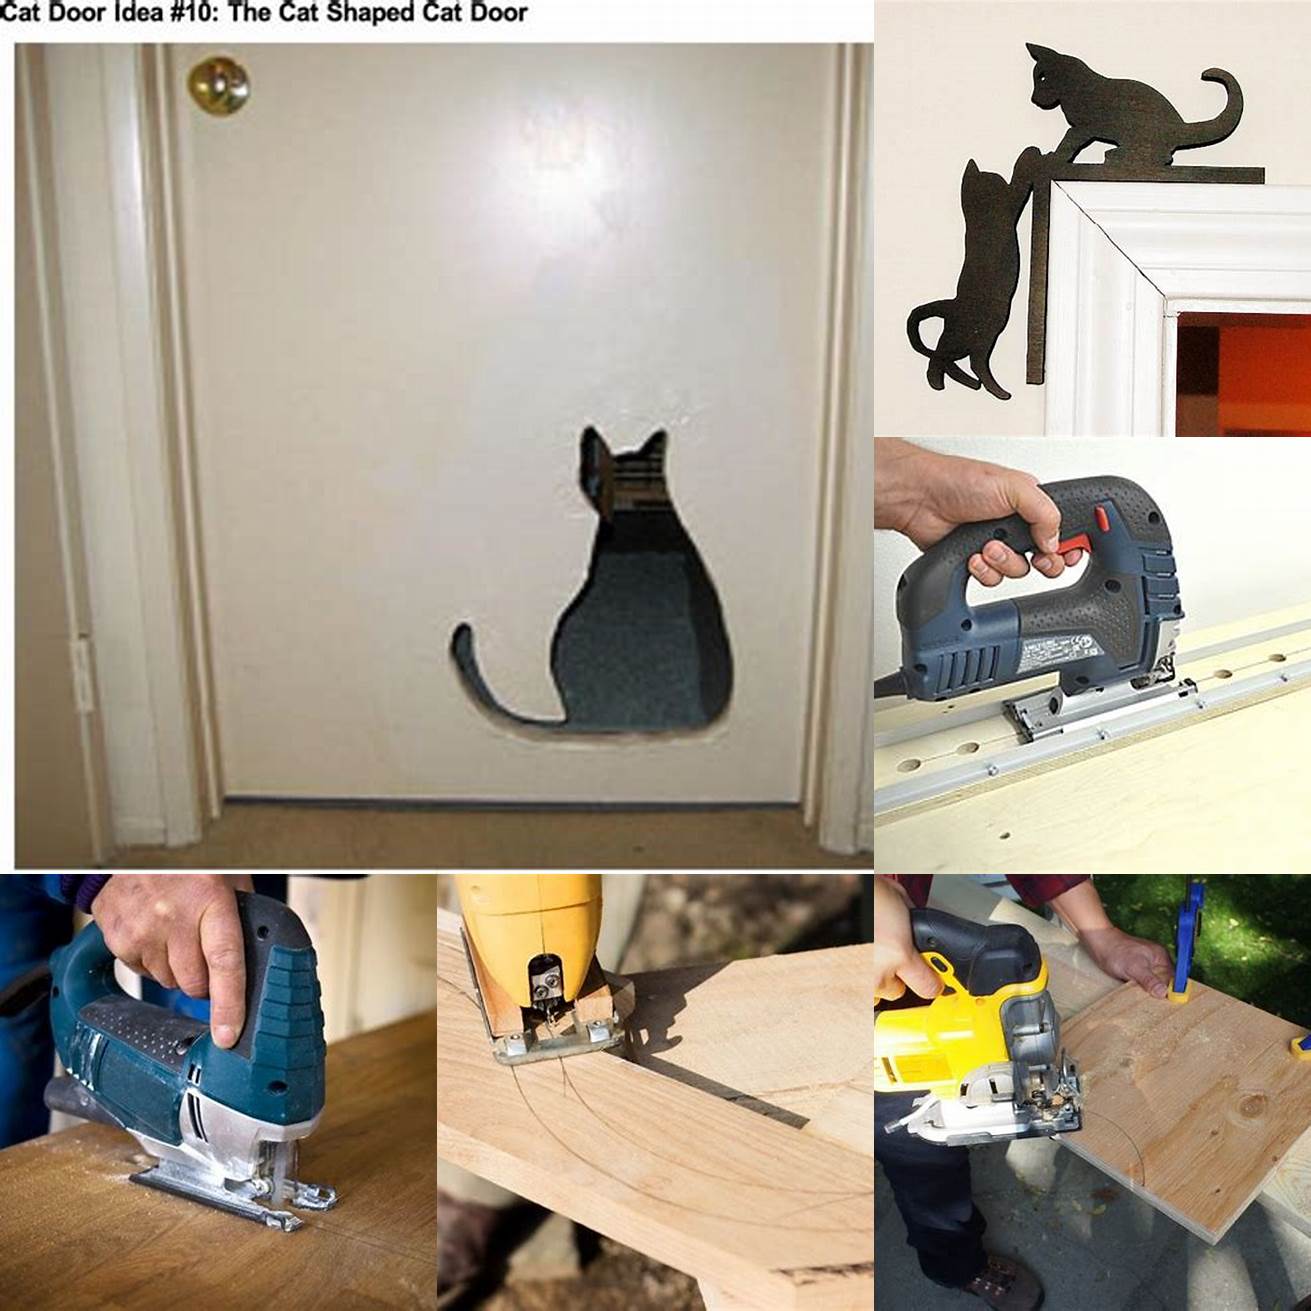 Use a jigsaw to cut out the opening for the cat door